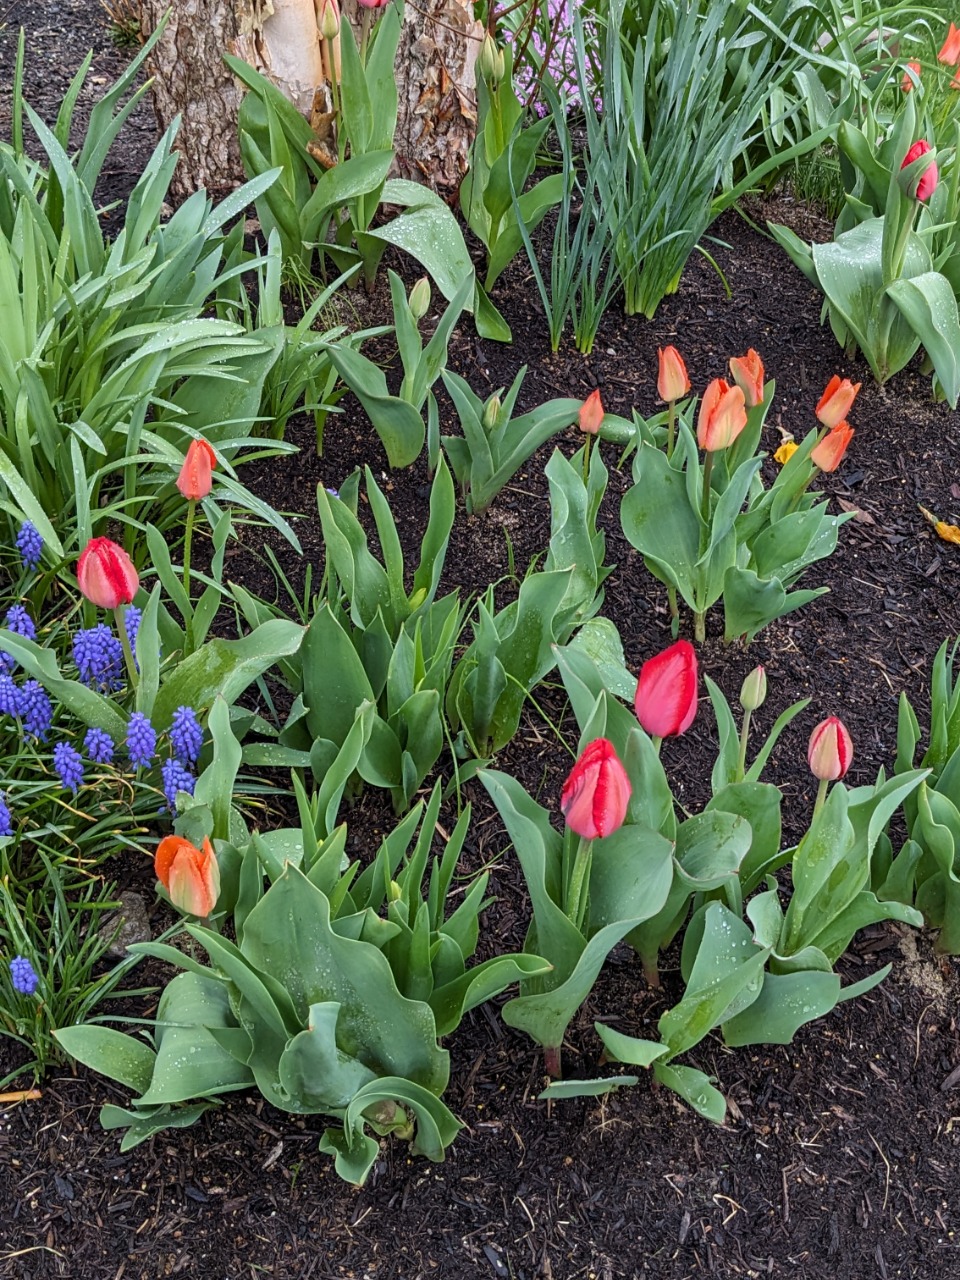 Various colors of tulips in a garden